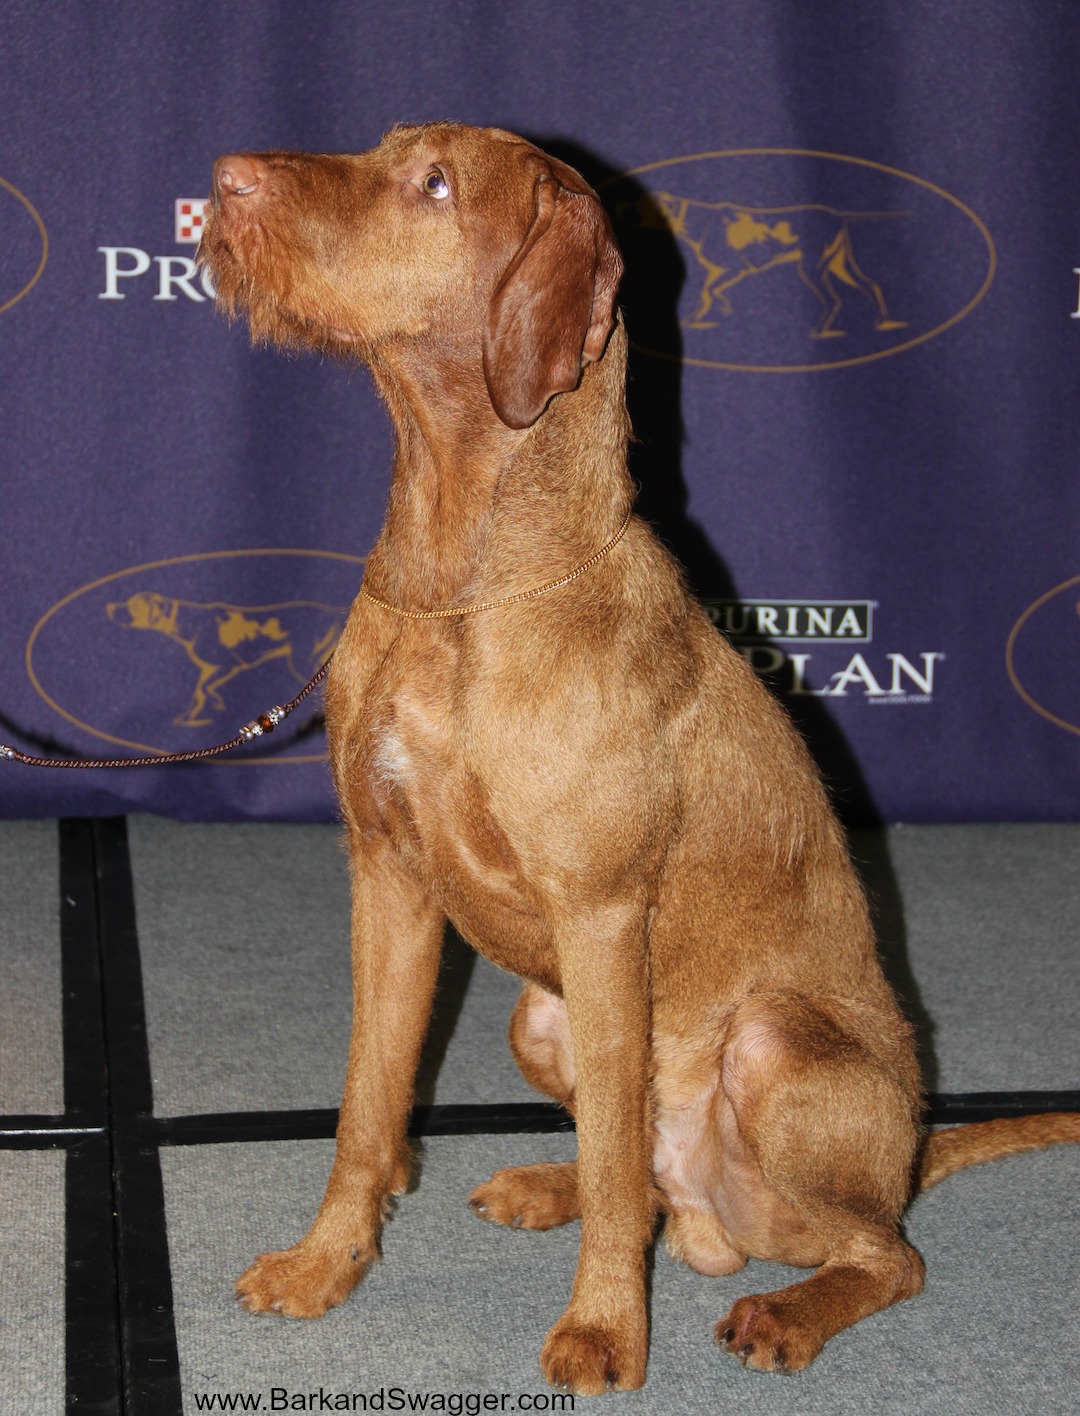 Meet the New AKC Breeds at Westminster this Year and More, as Bark